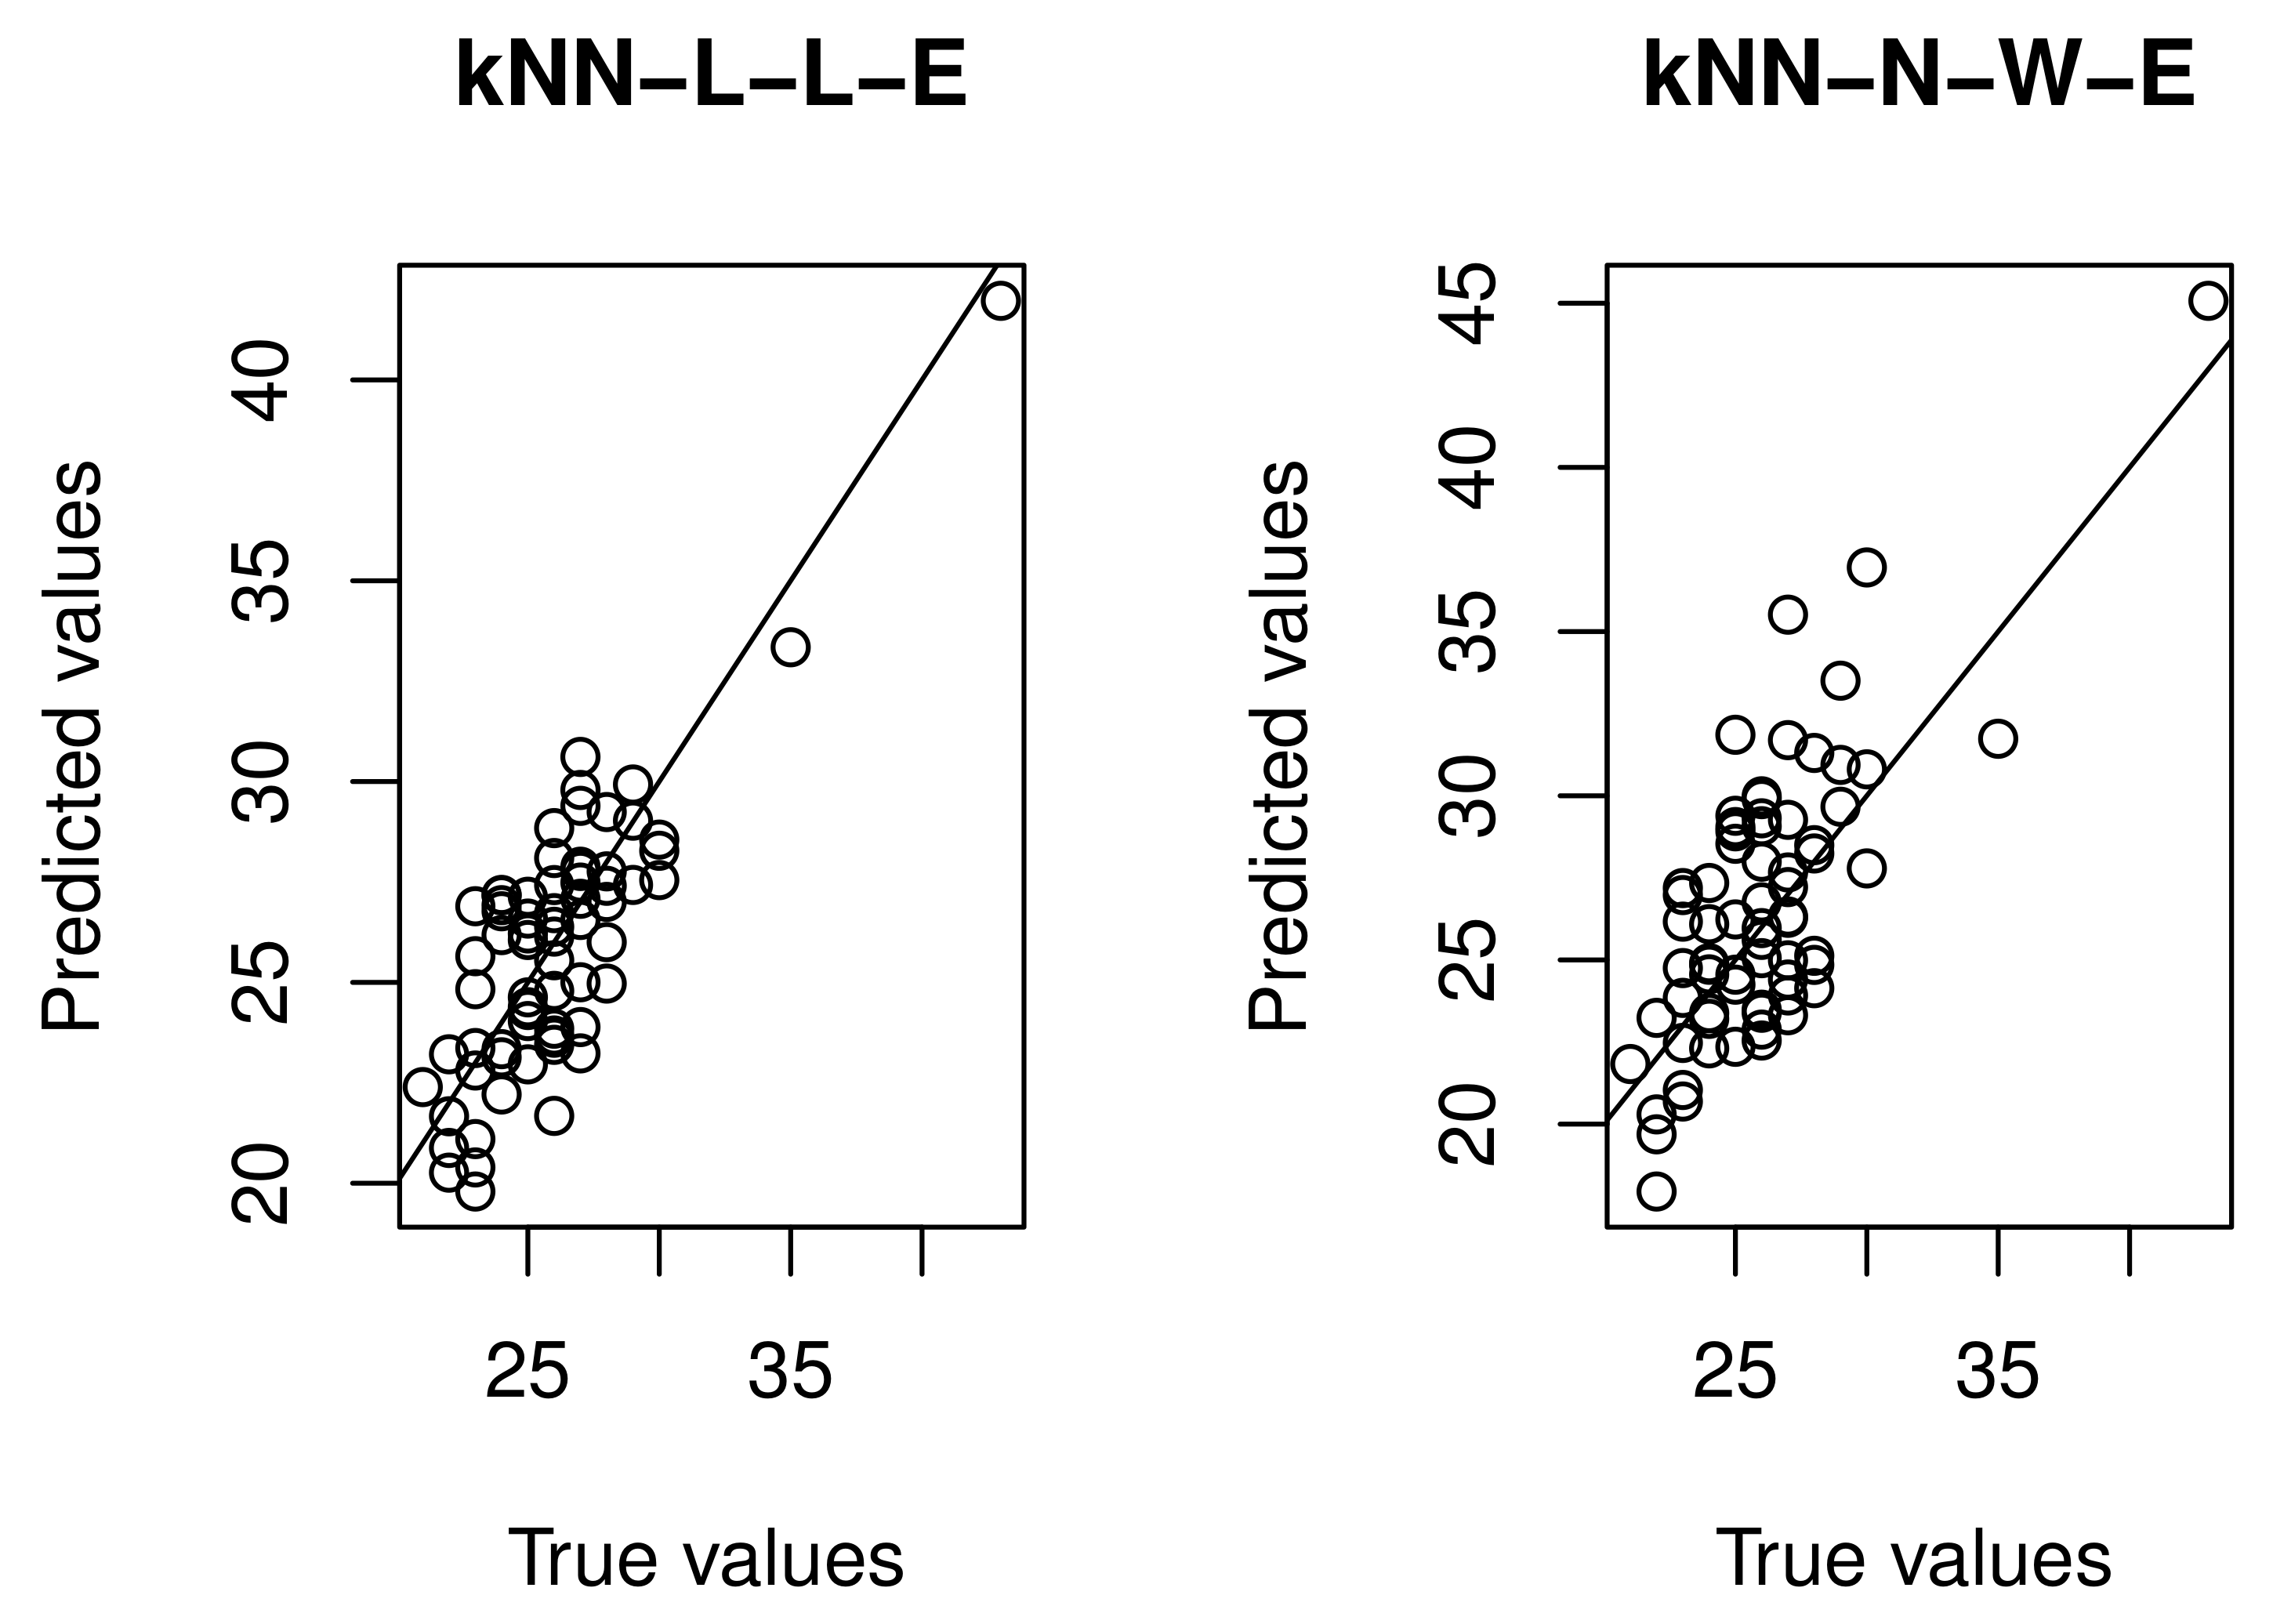 Uniform consistency and uniform in number of neighbors consistency for  nonparametric regression estimates and conditional U-statistics involving  functional data